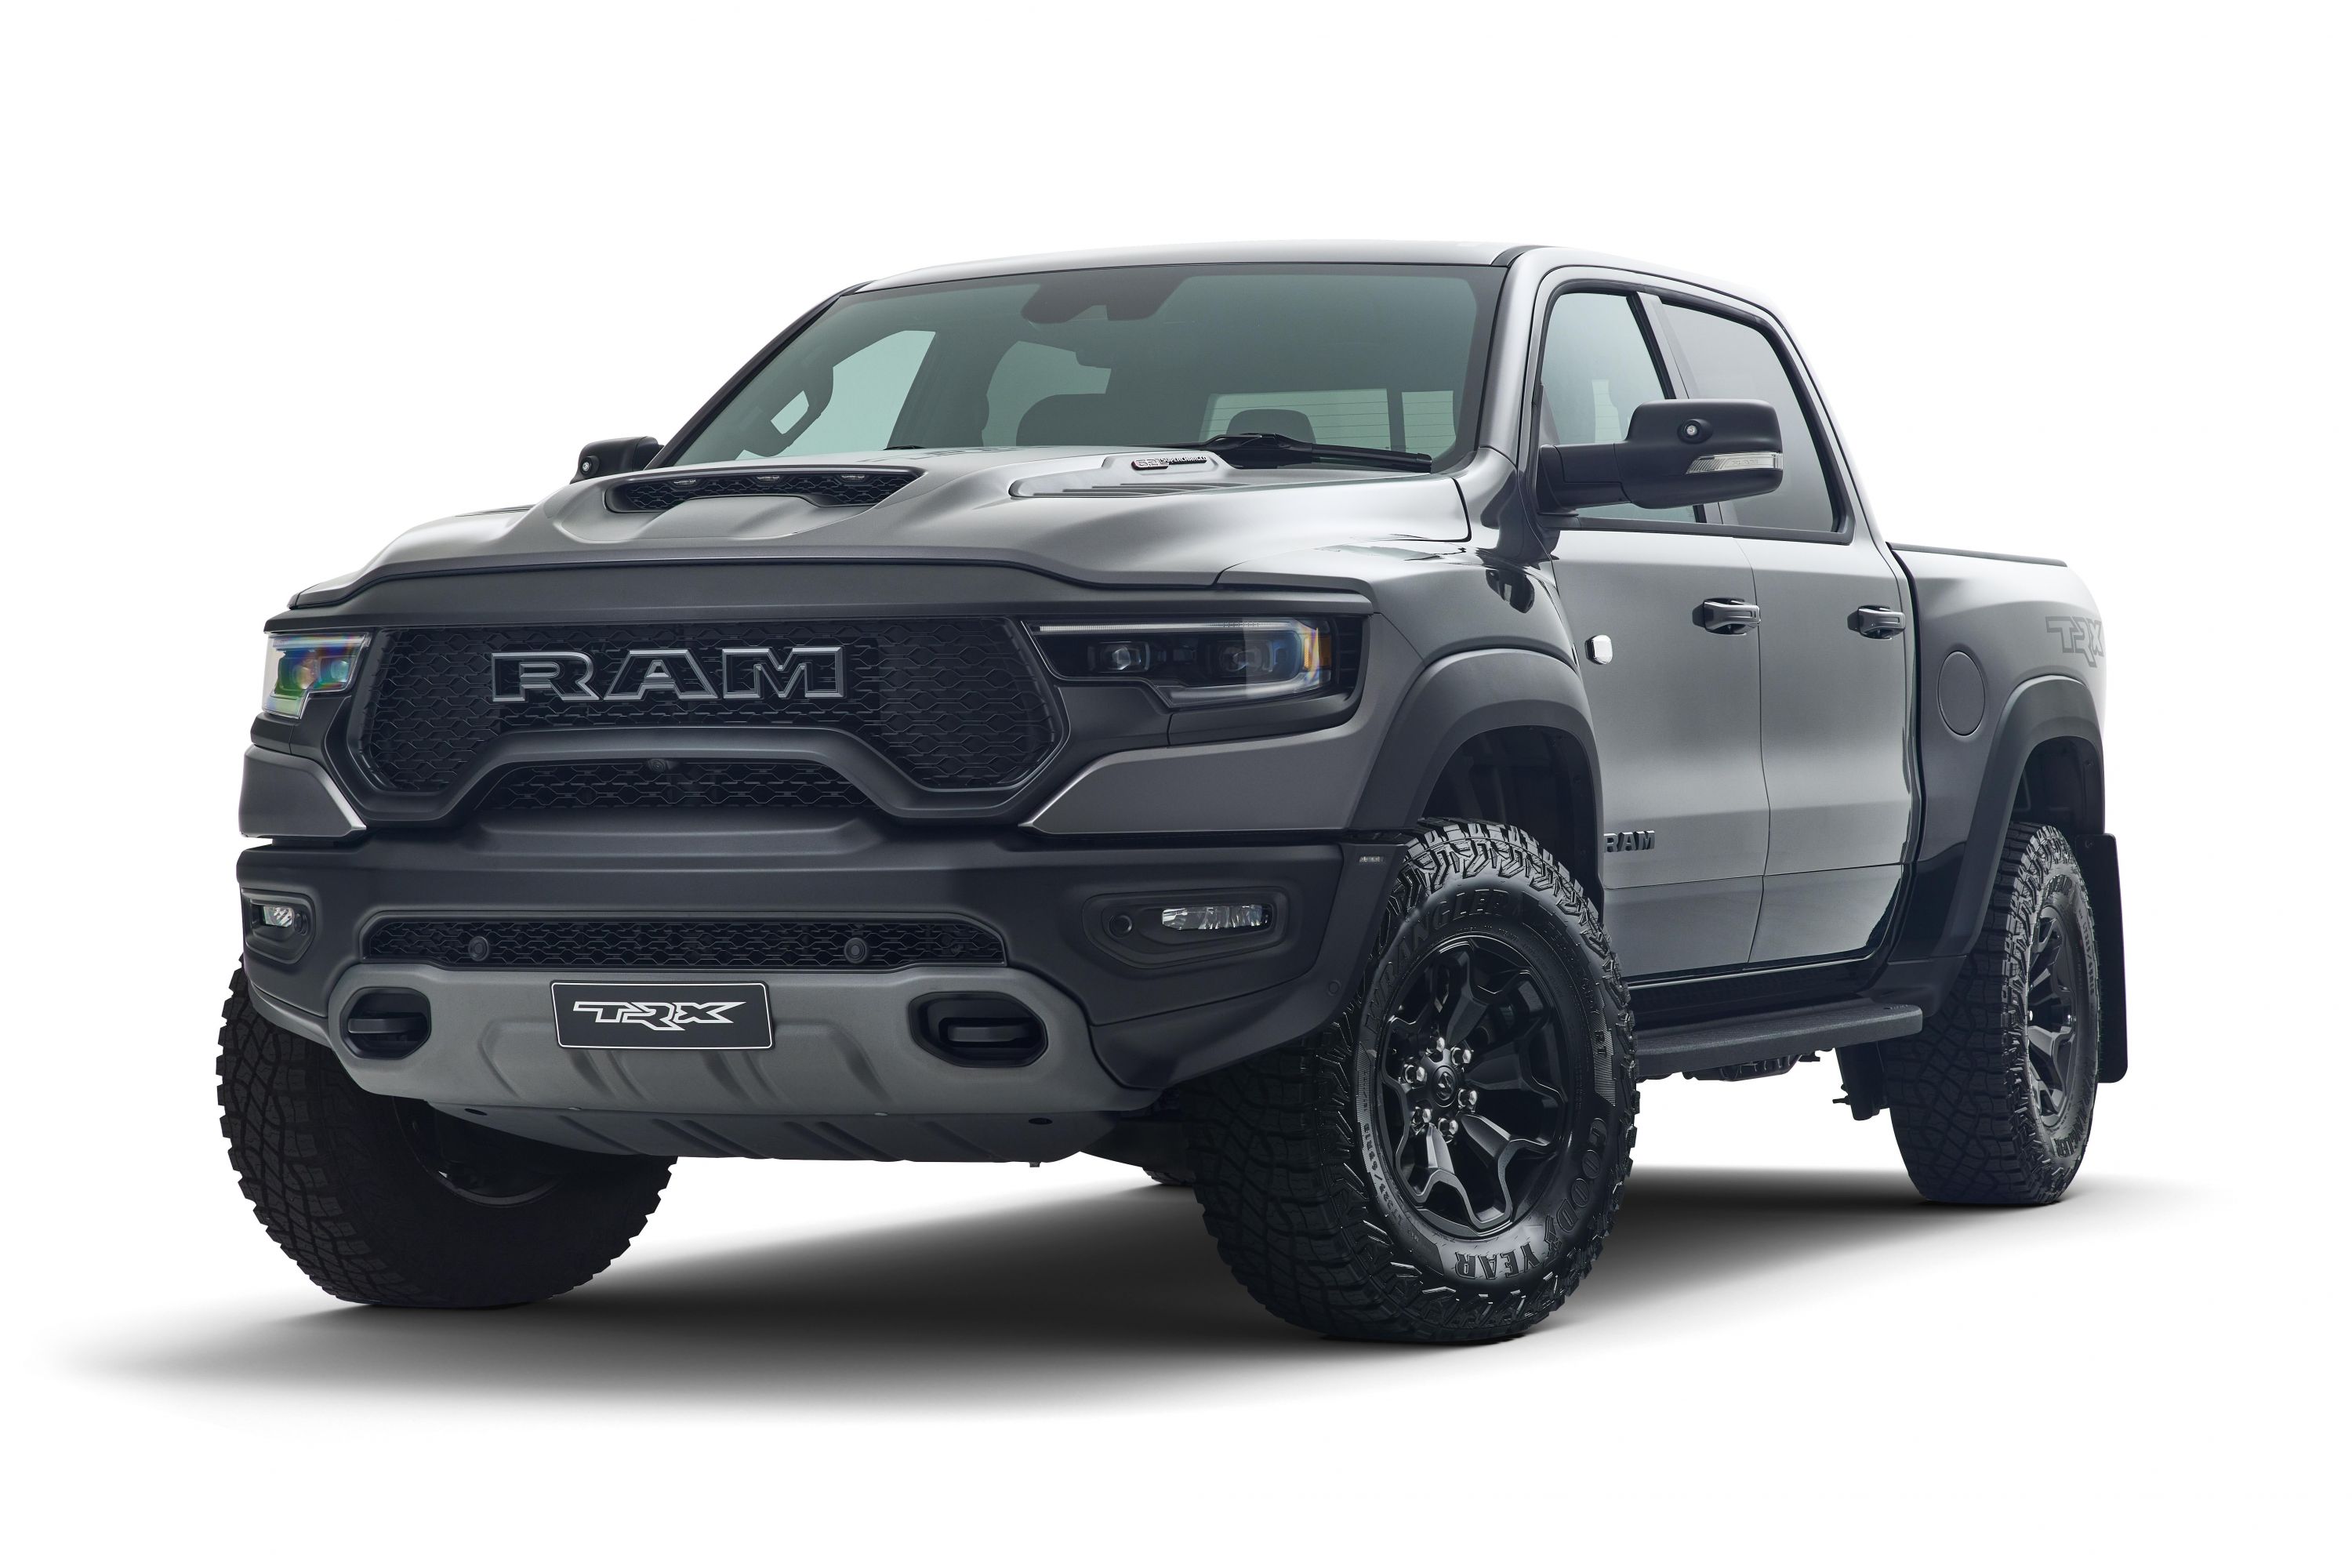 Ram to stop production of V-8 TRX supertruck at end of year